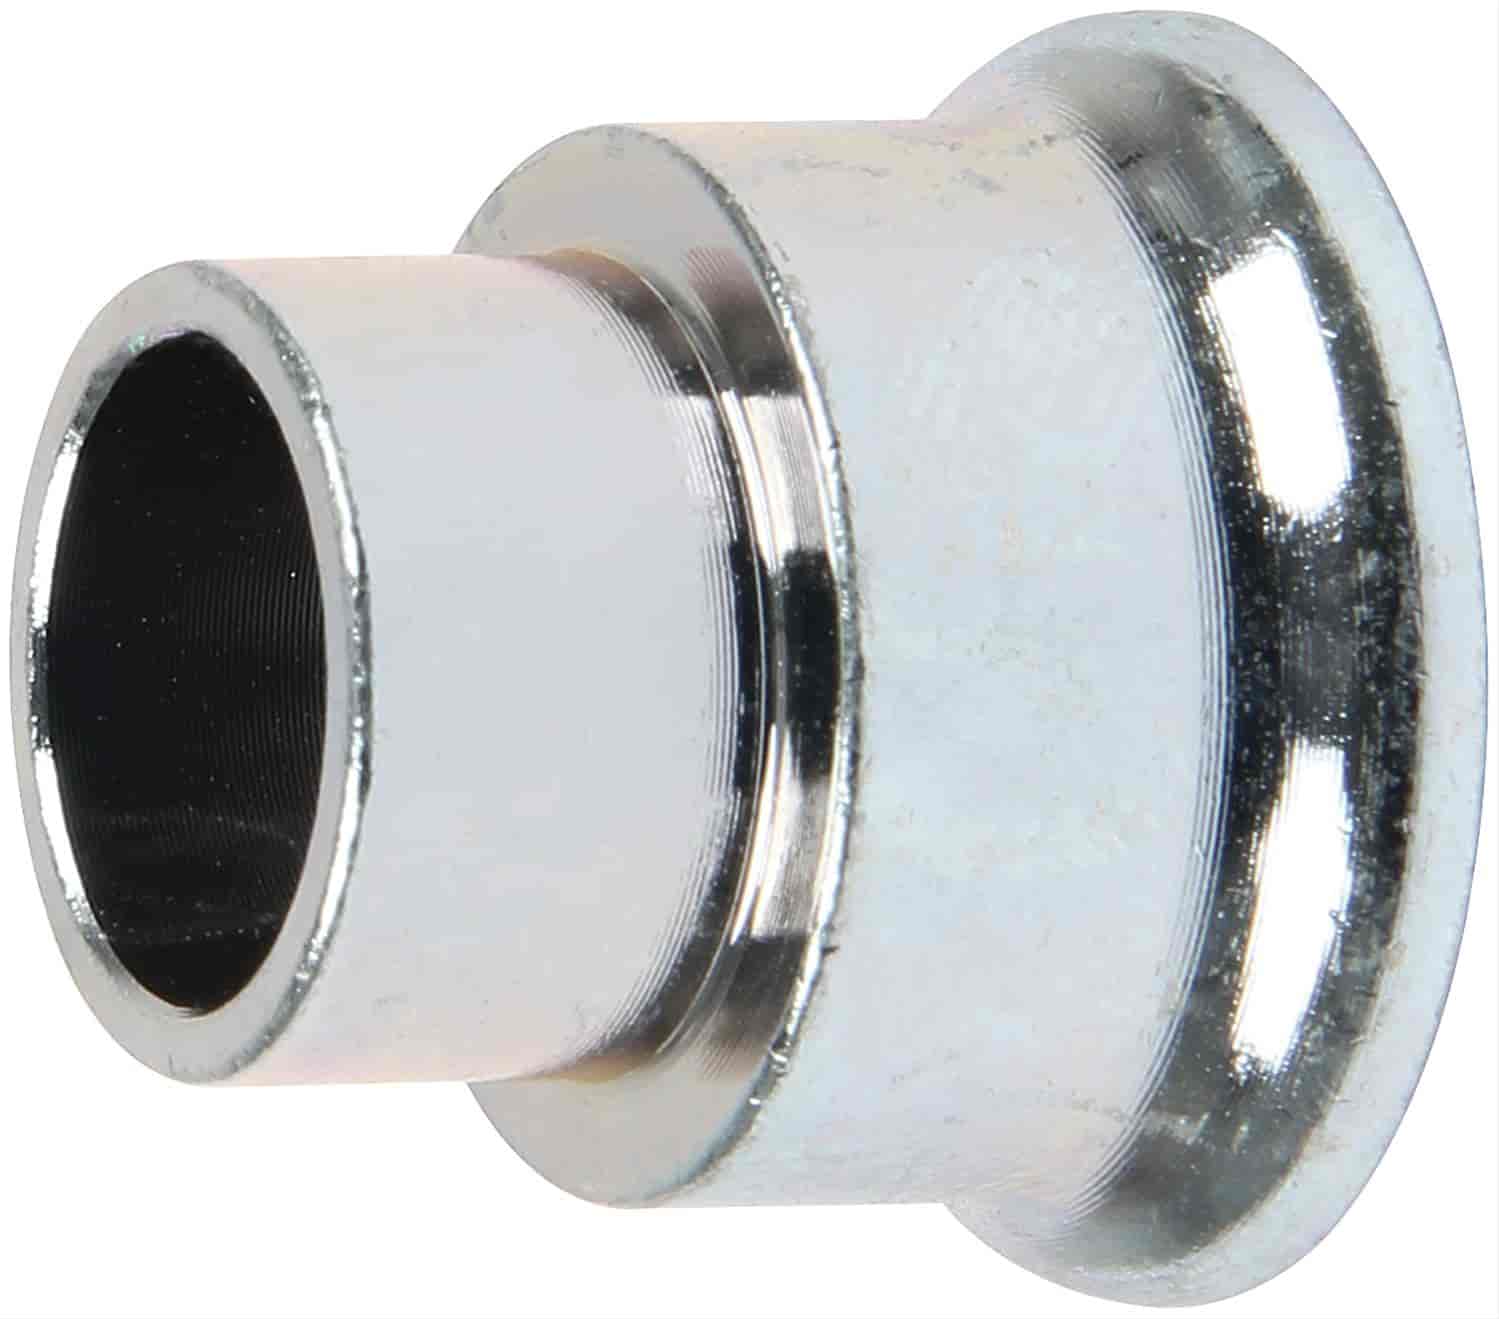 Rod End Reducer Spacers 1/2" Length